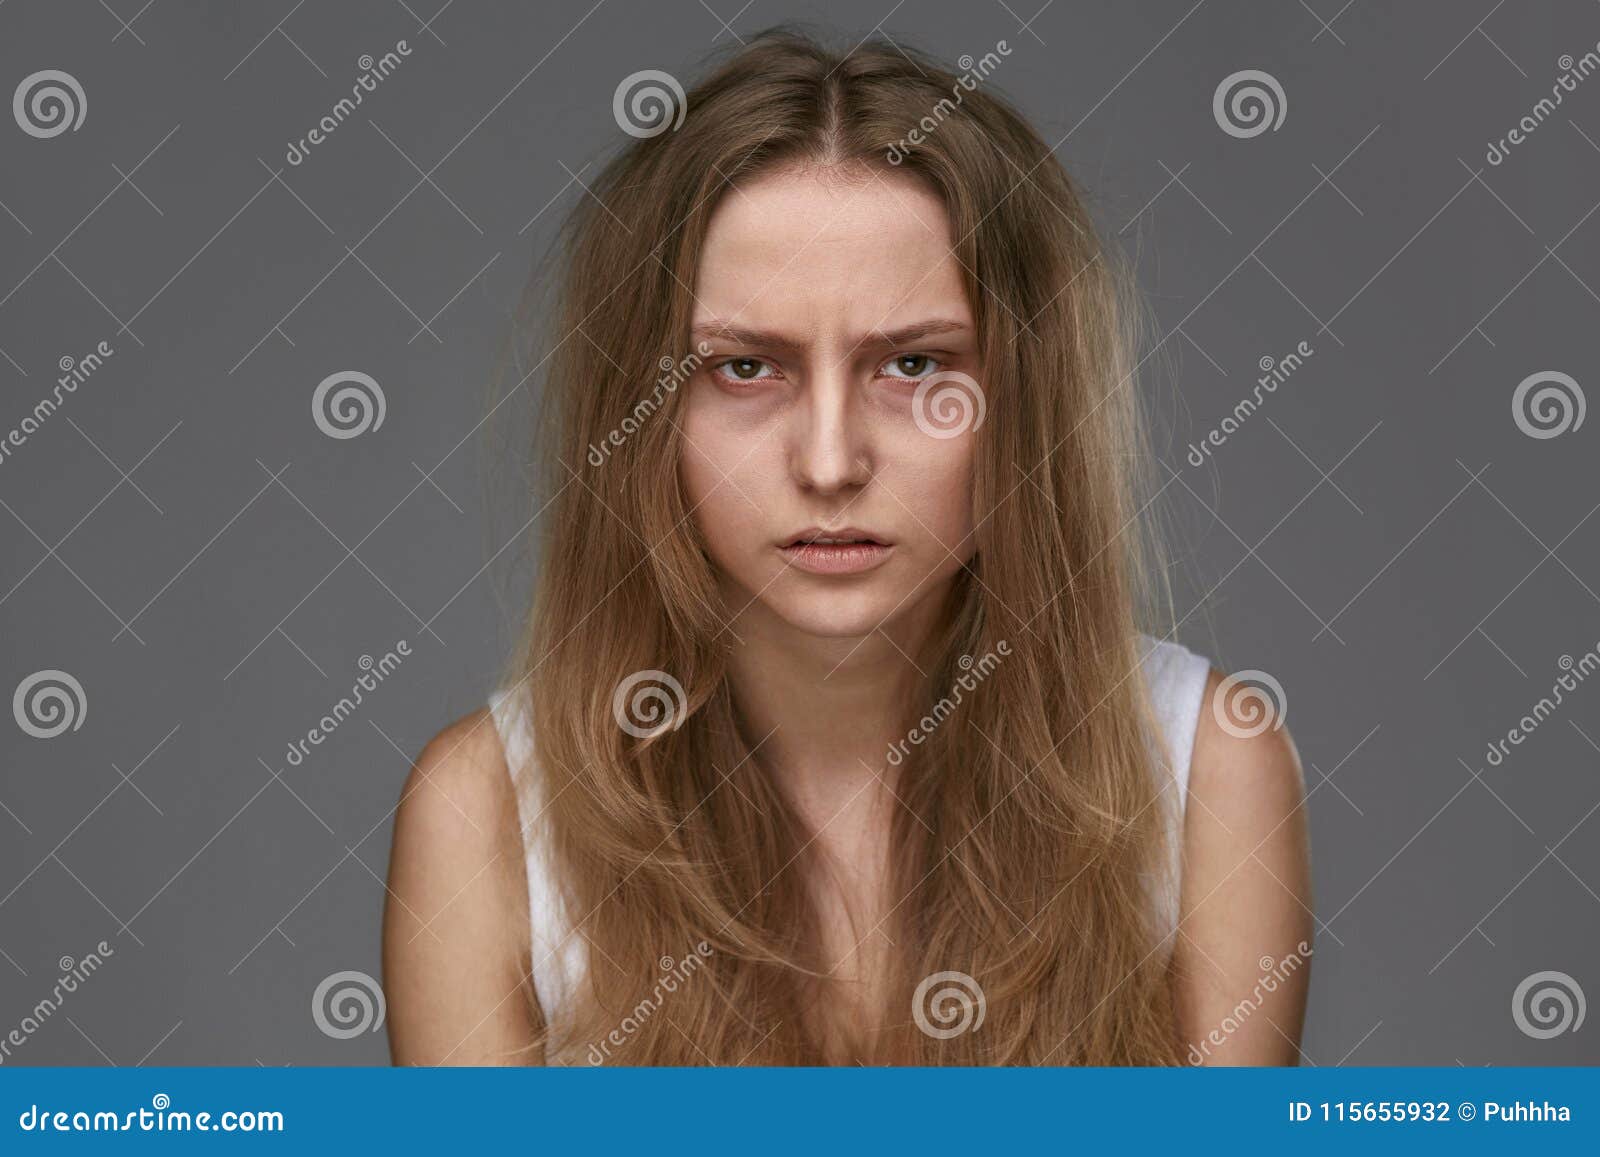 exhausted young woman with bruises under eyes